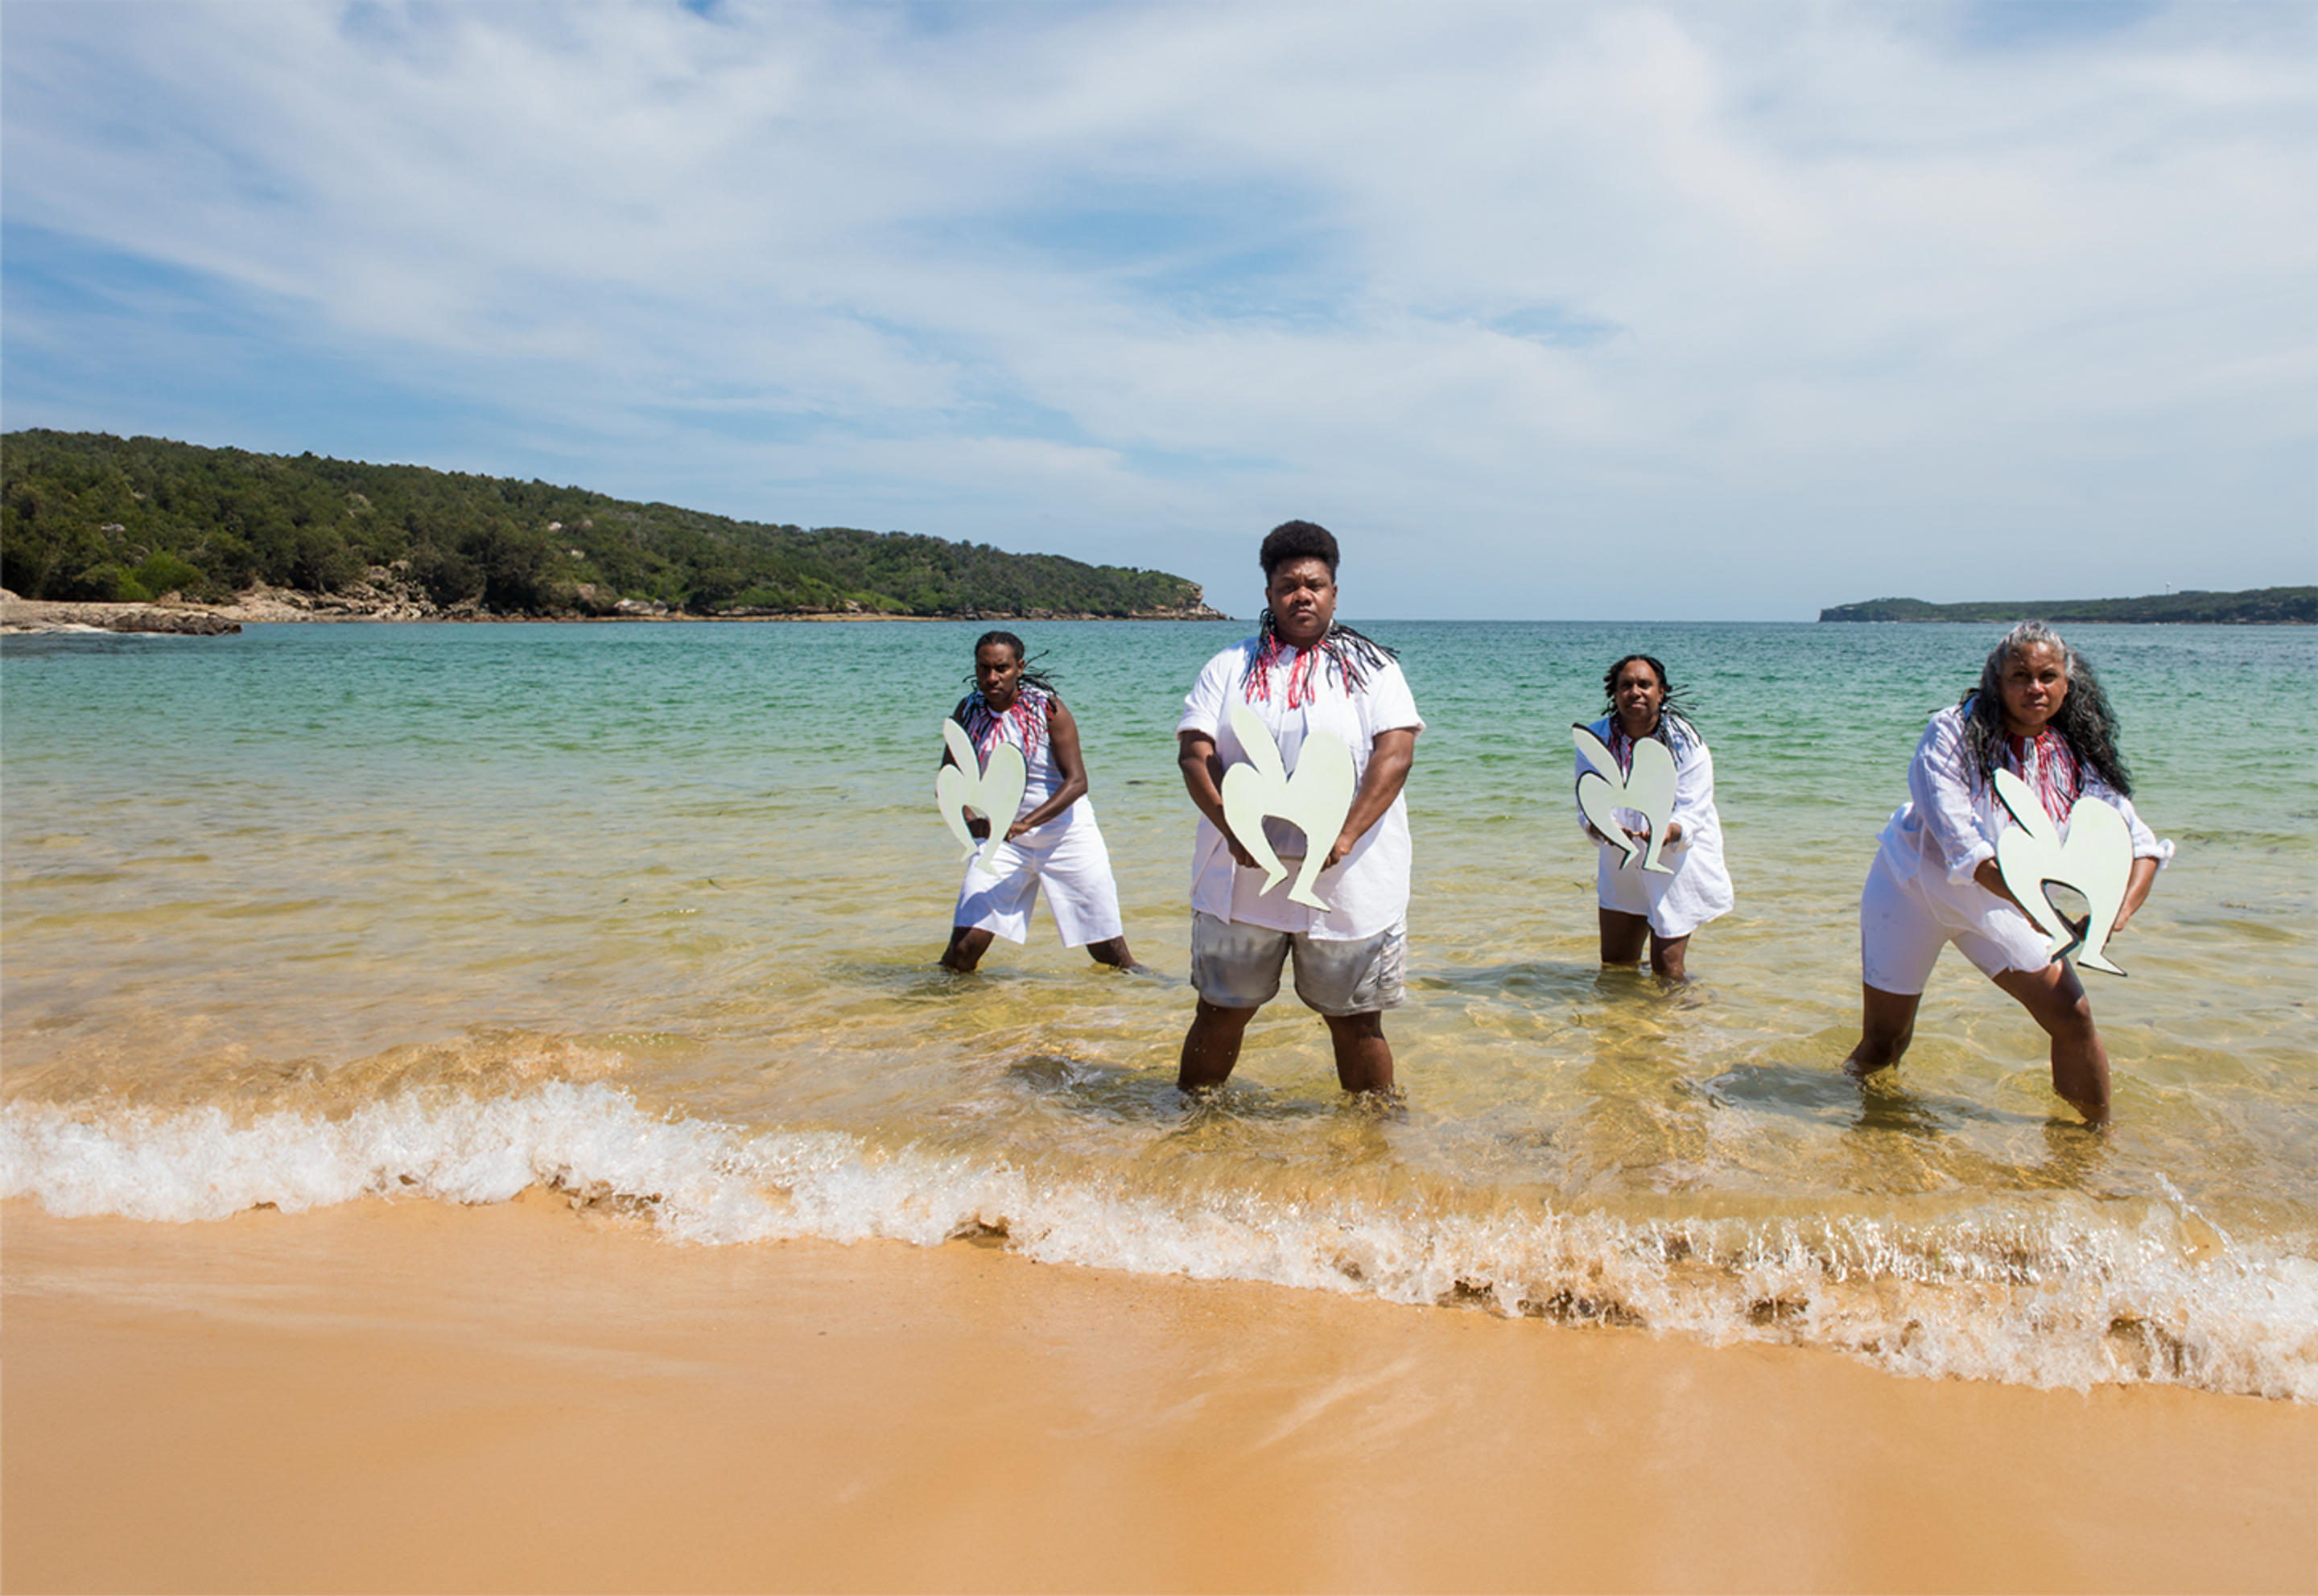 A group of people stand in the shallows of a tropical beach, holding cut-out shapes. 